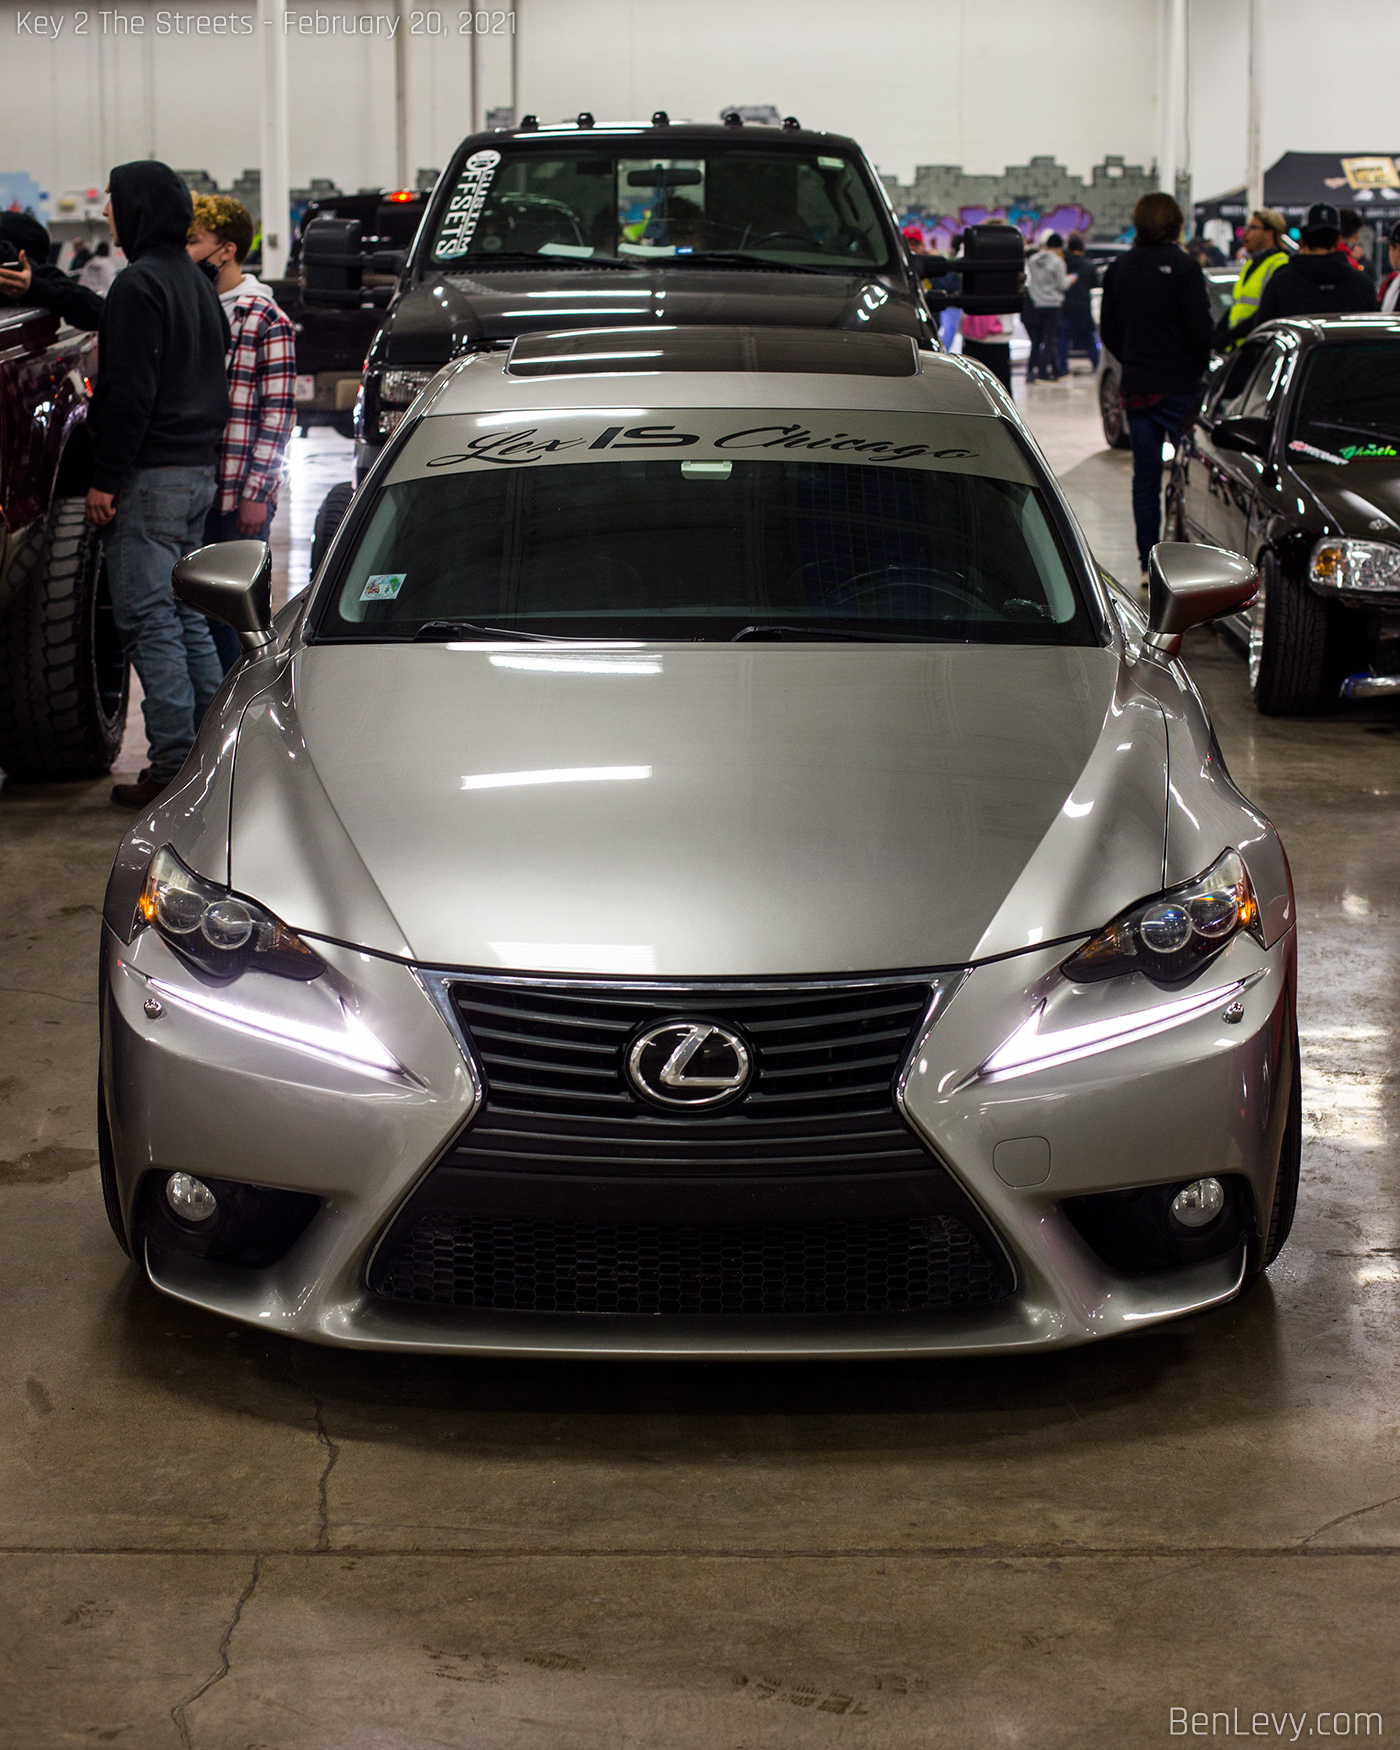 Lexus IS250 at Key 2 The Streets